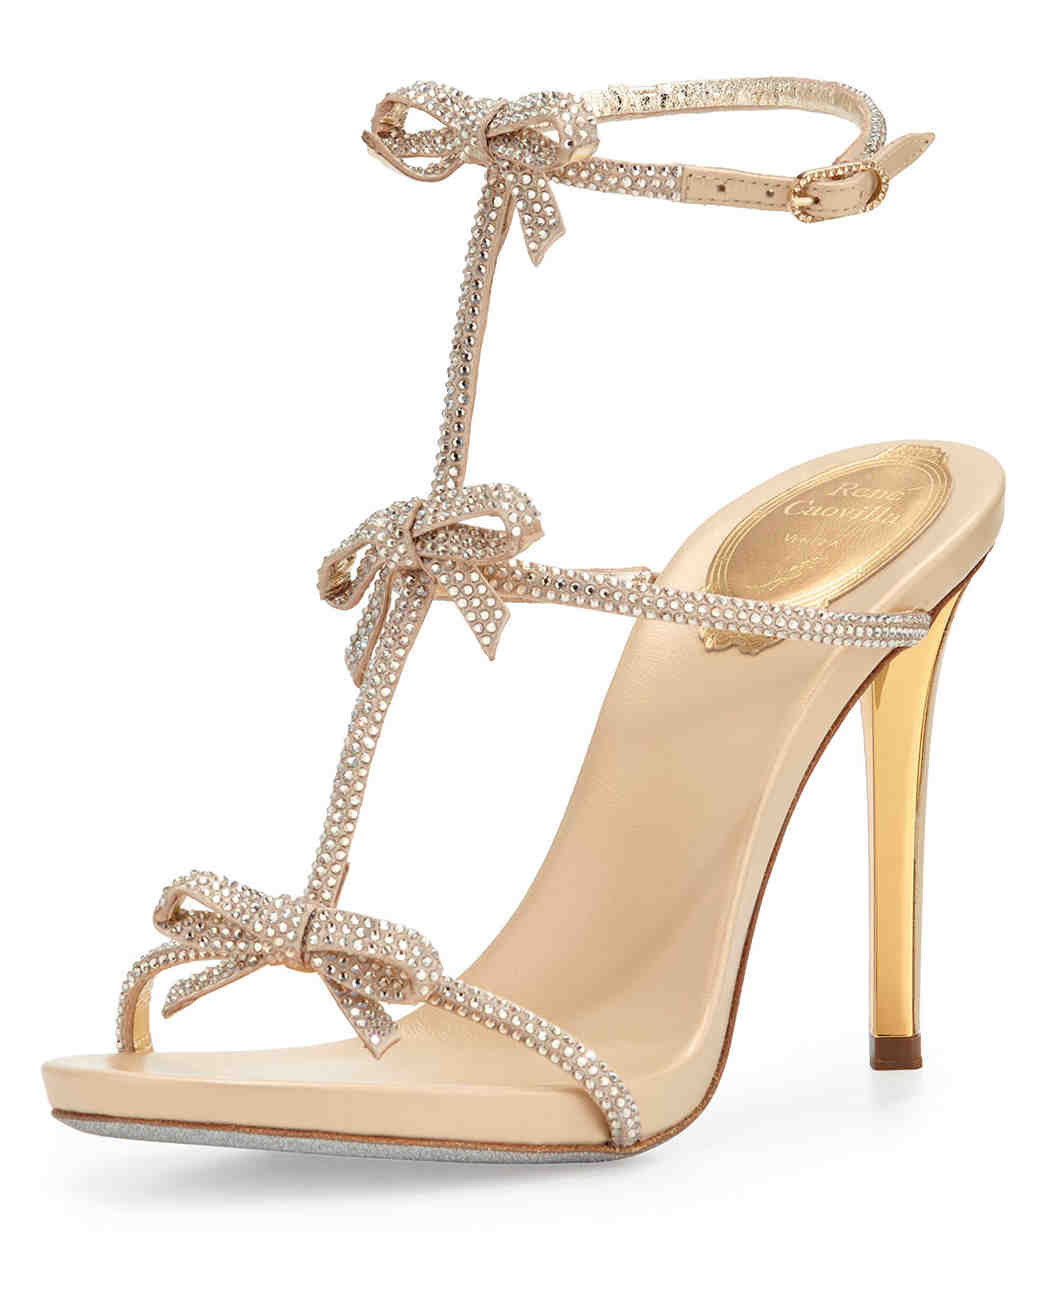 Summer Wedding Shoes
 50 Best Shoes for a Bride to Wear to a Summer Wedding